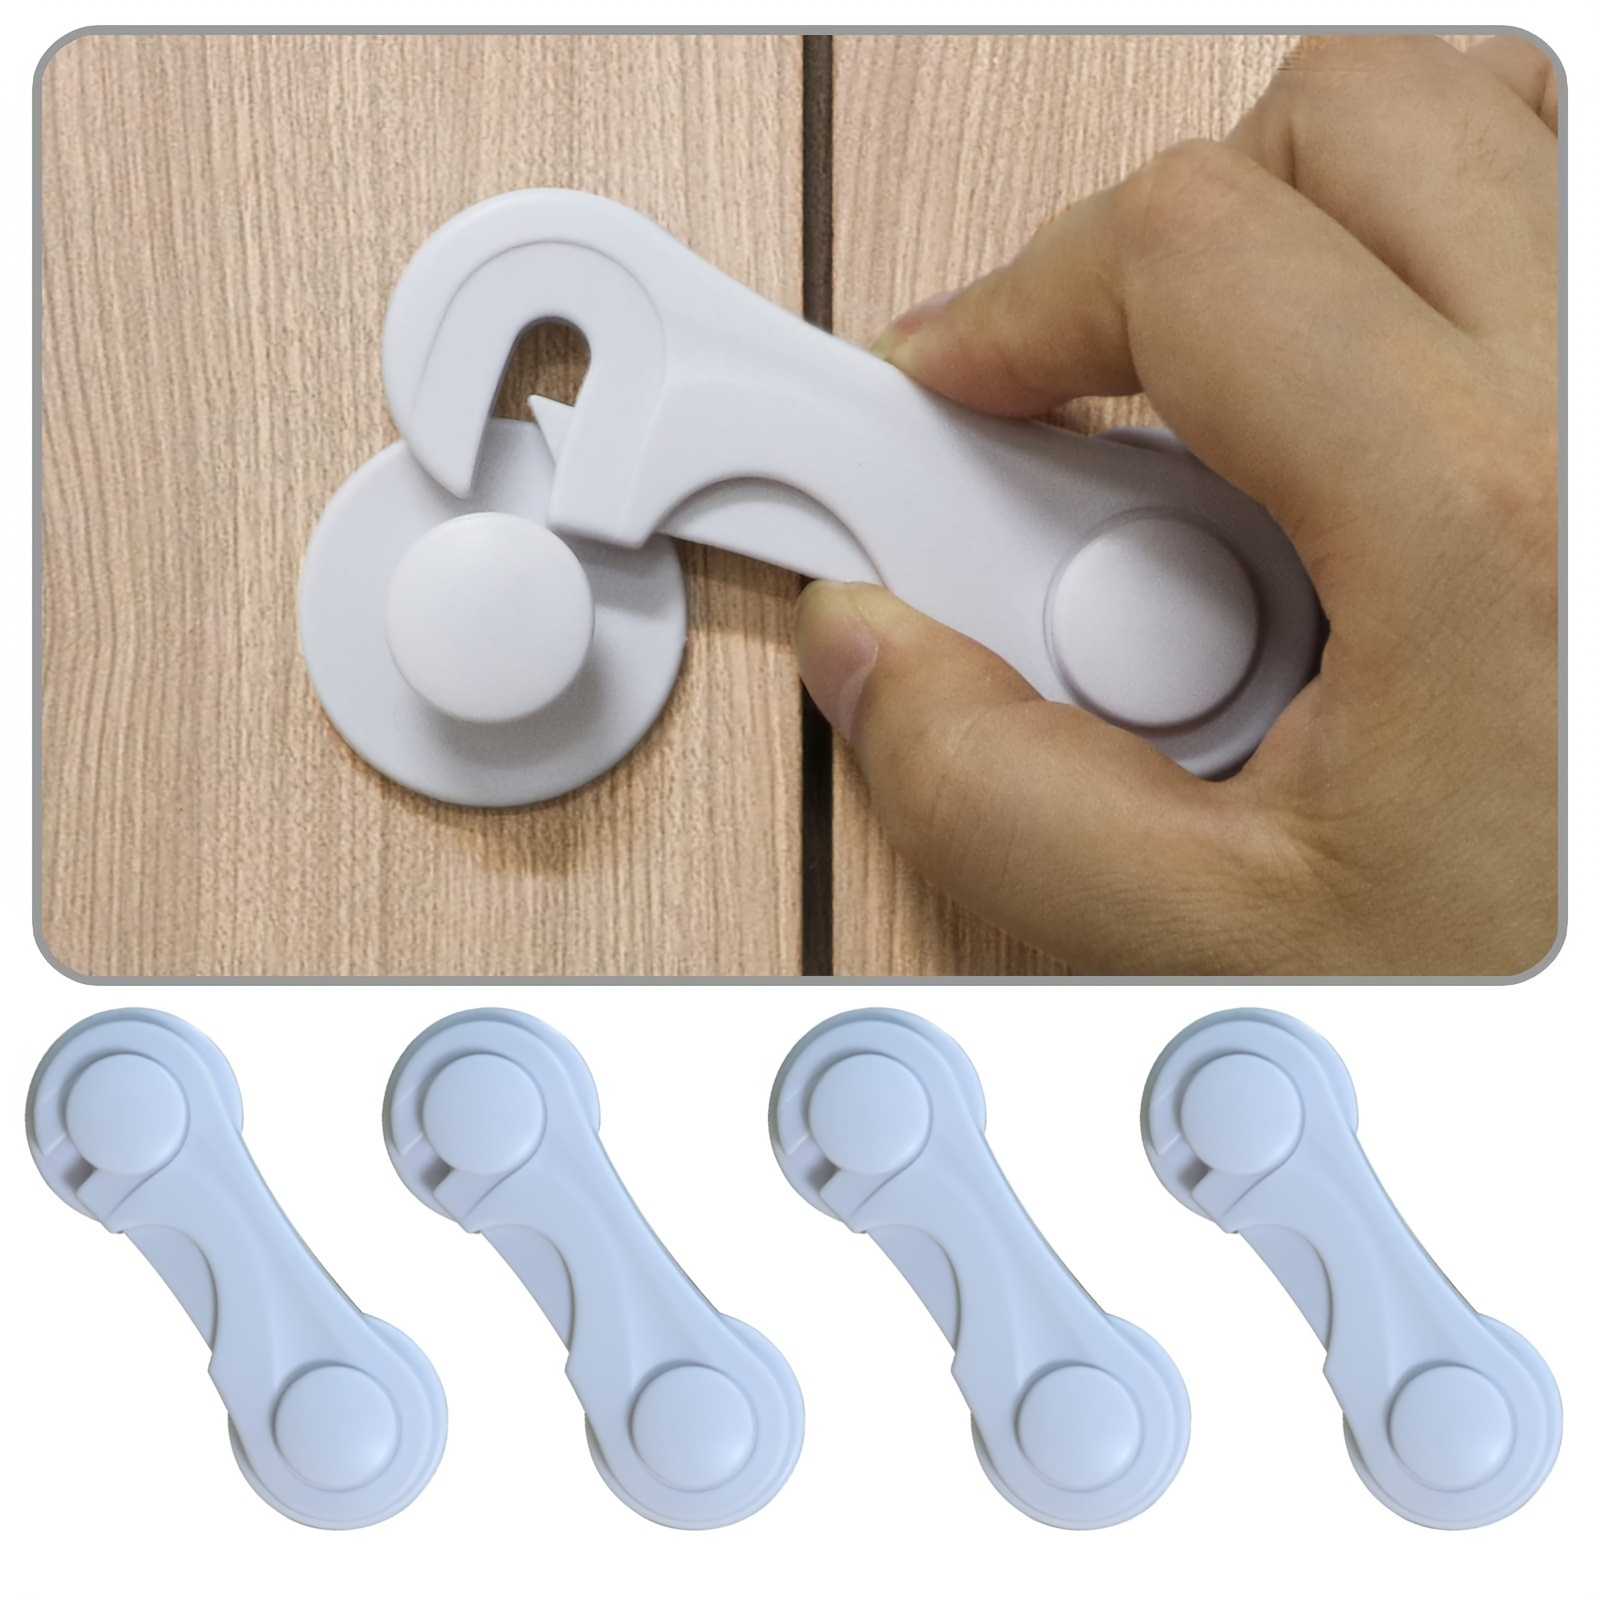 Baby Safety Lock Kids Children Security Protection Lock No Punching Drawer  Cupboard Door Toilet Cabinet Plastic Invisible Locks